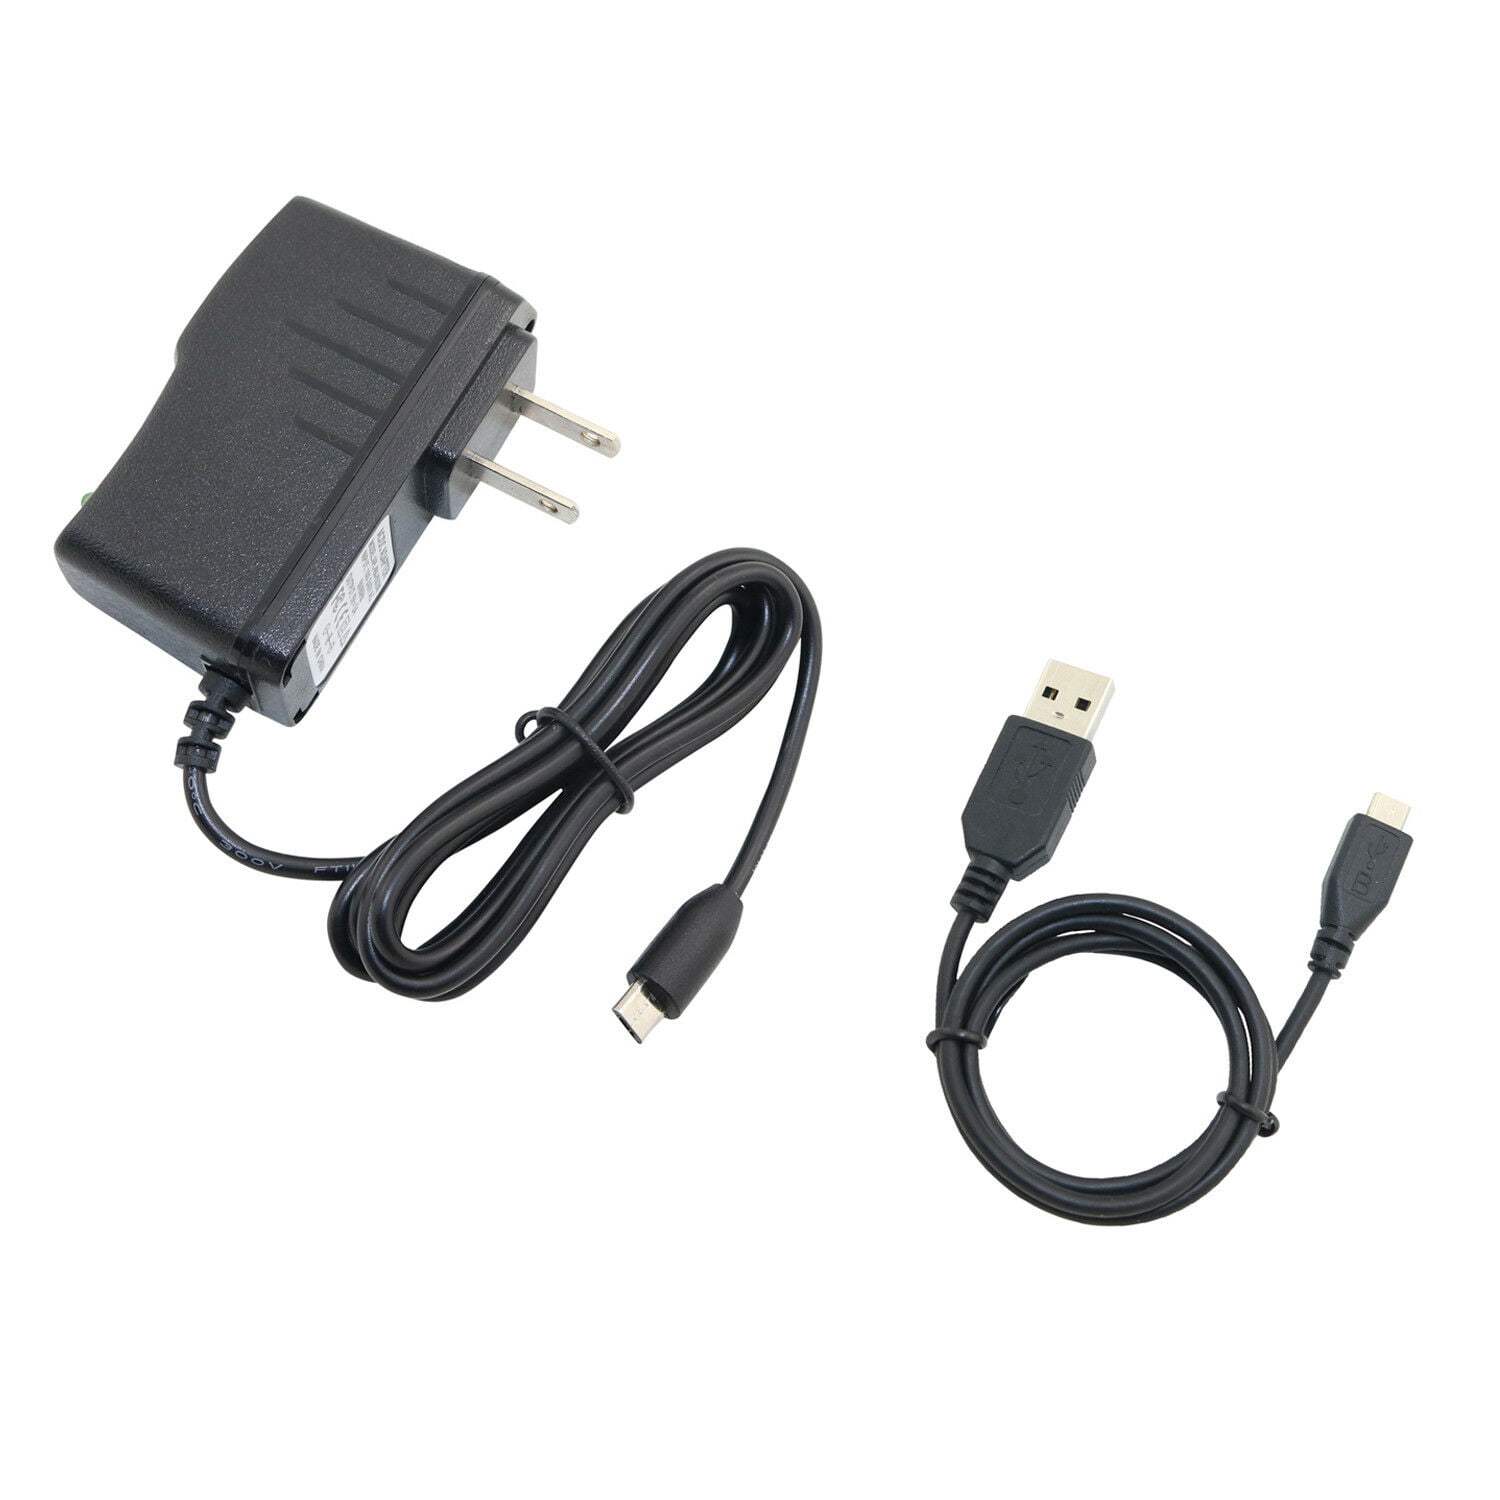 USB Cord Cable for Nextbook Tablet Next 6 P AC/DC Wall Charger Power Adapter 